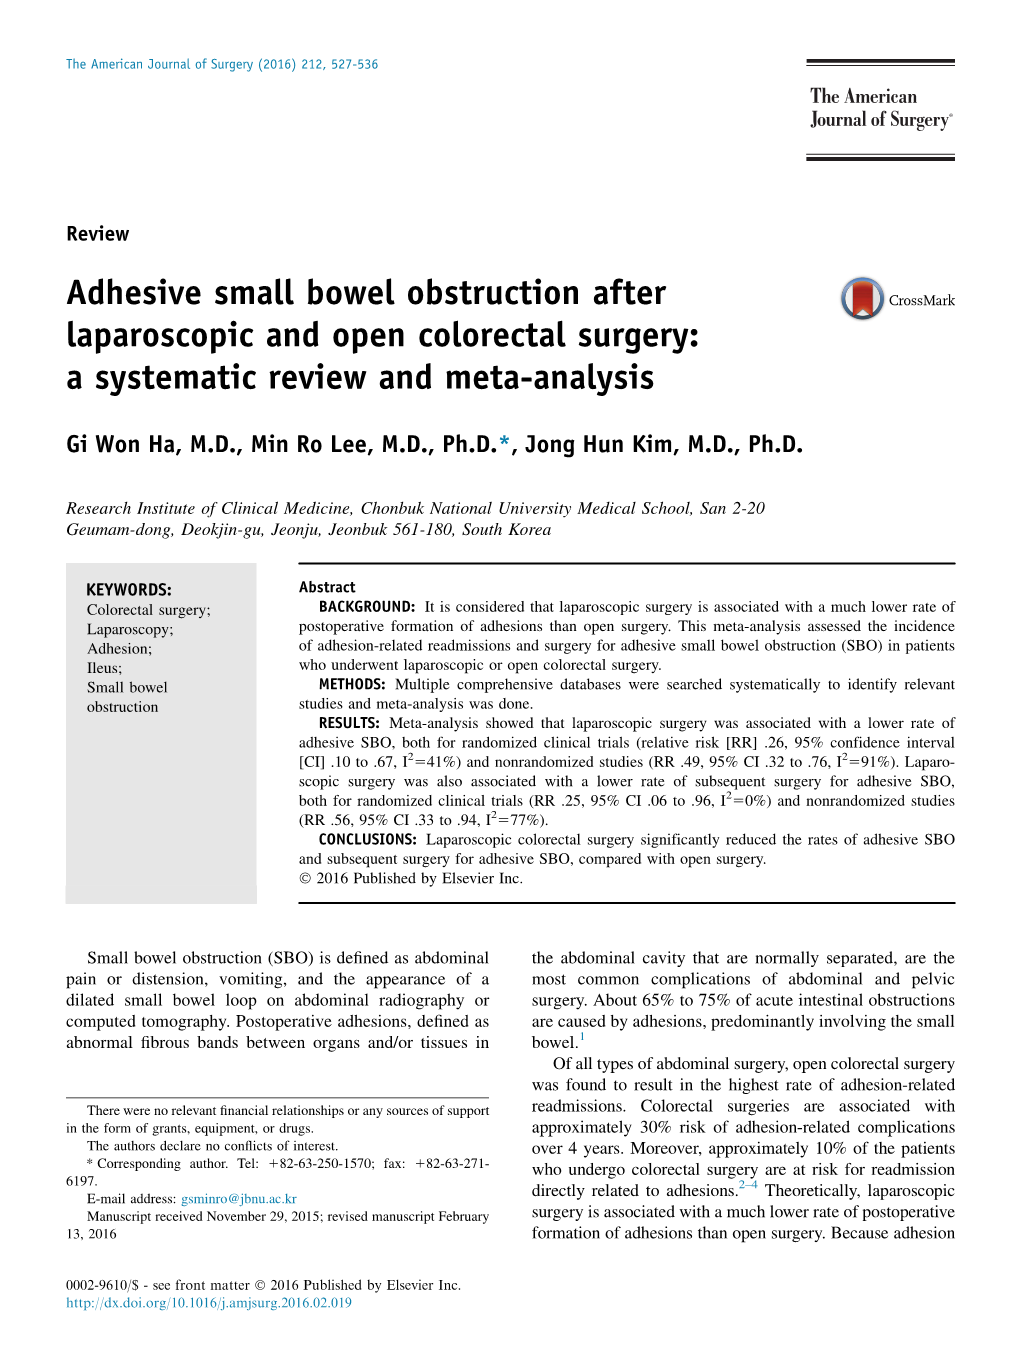 Adhesive Small Bowel Obstruction After Laparoscopic and Open Colorectal Surgery: a Systematic Review and Meta-Analysis